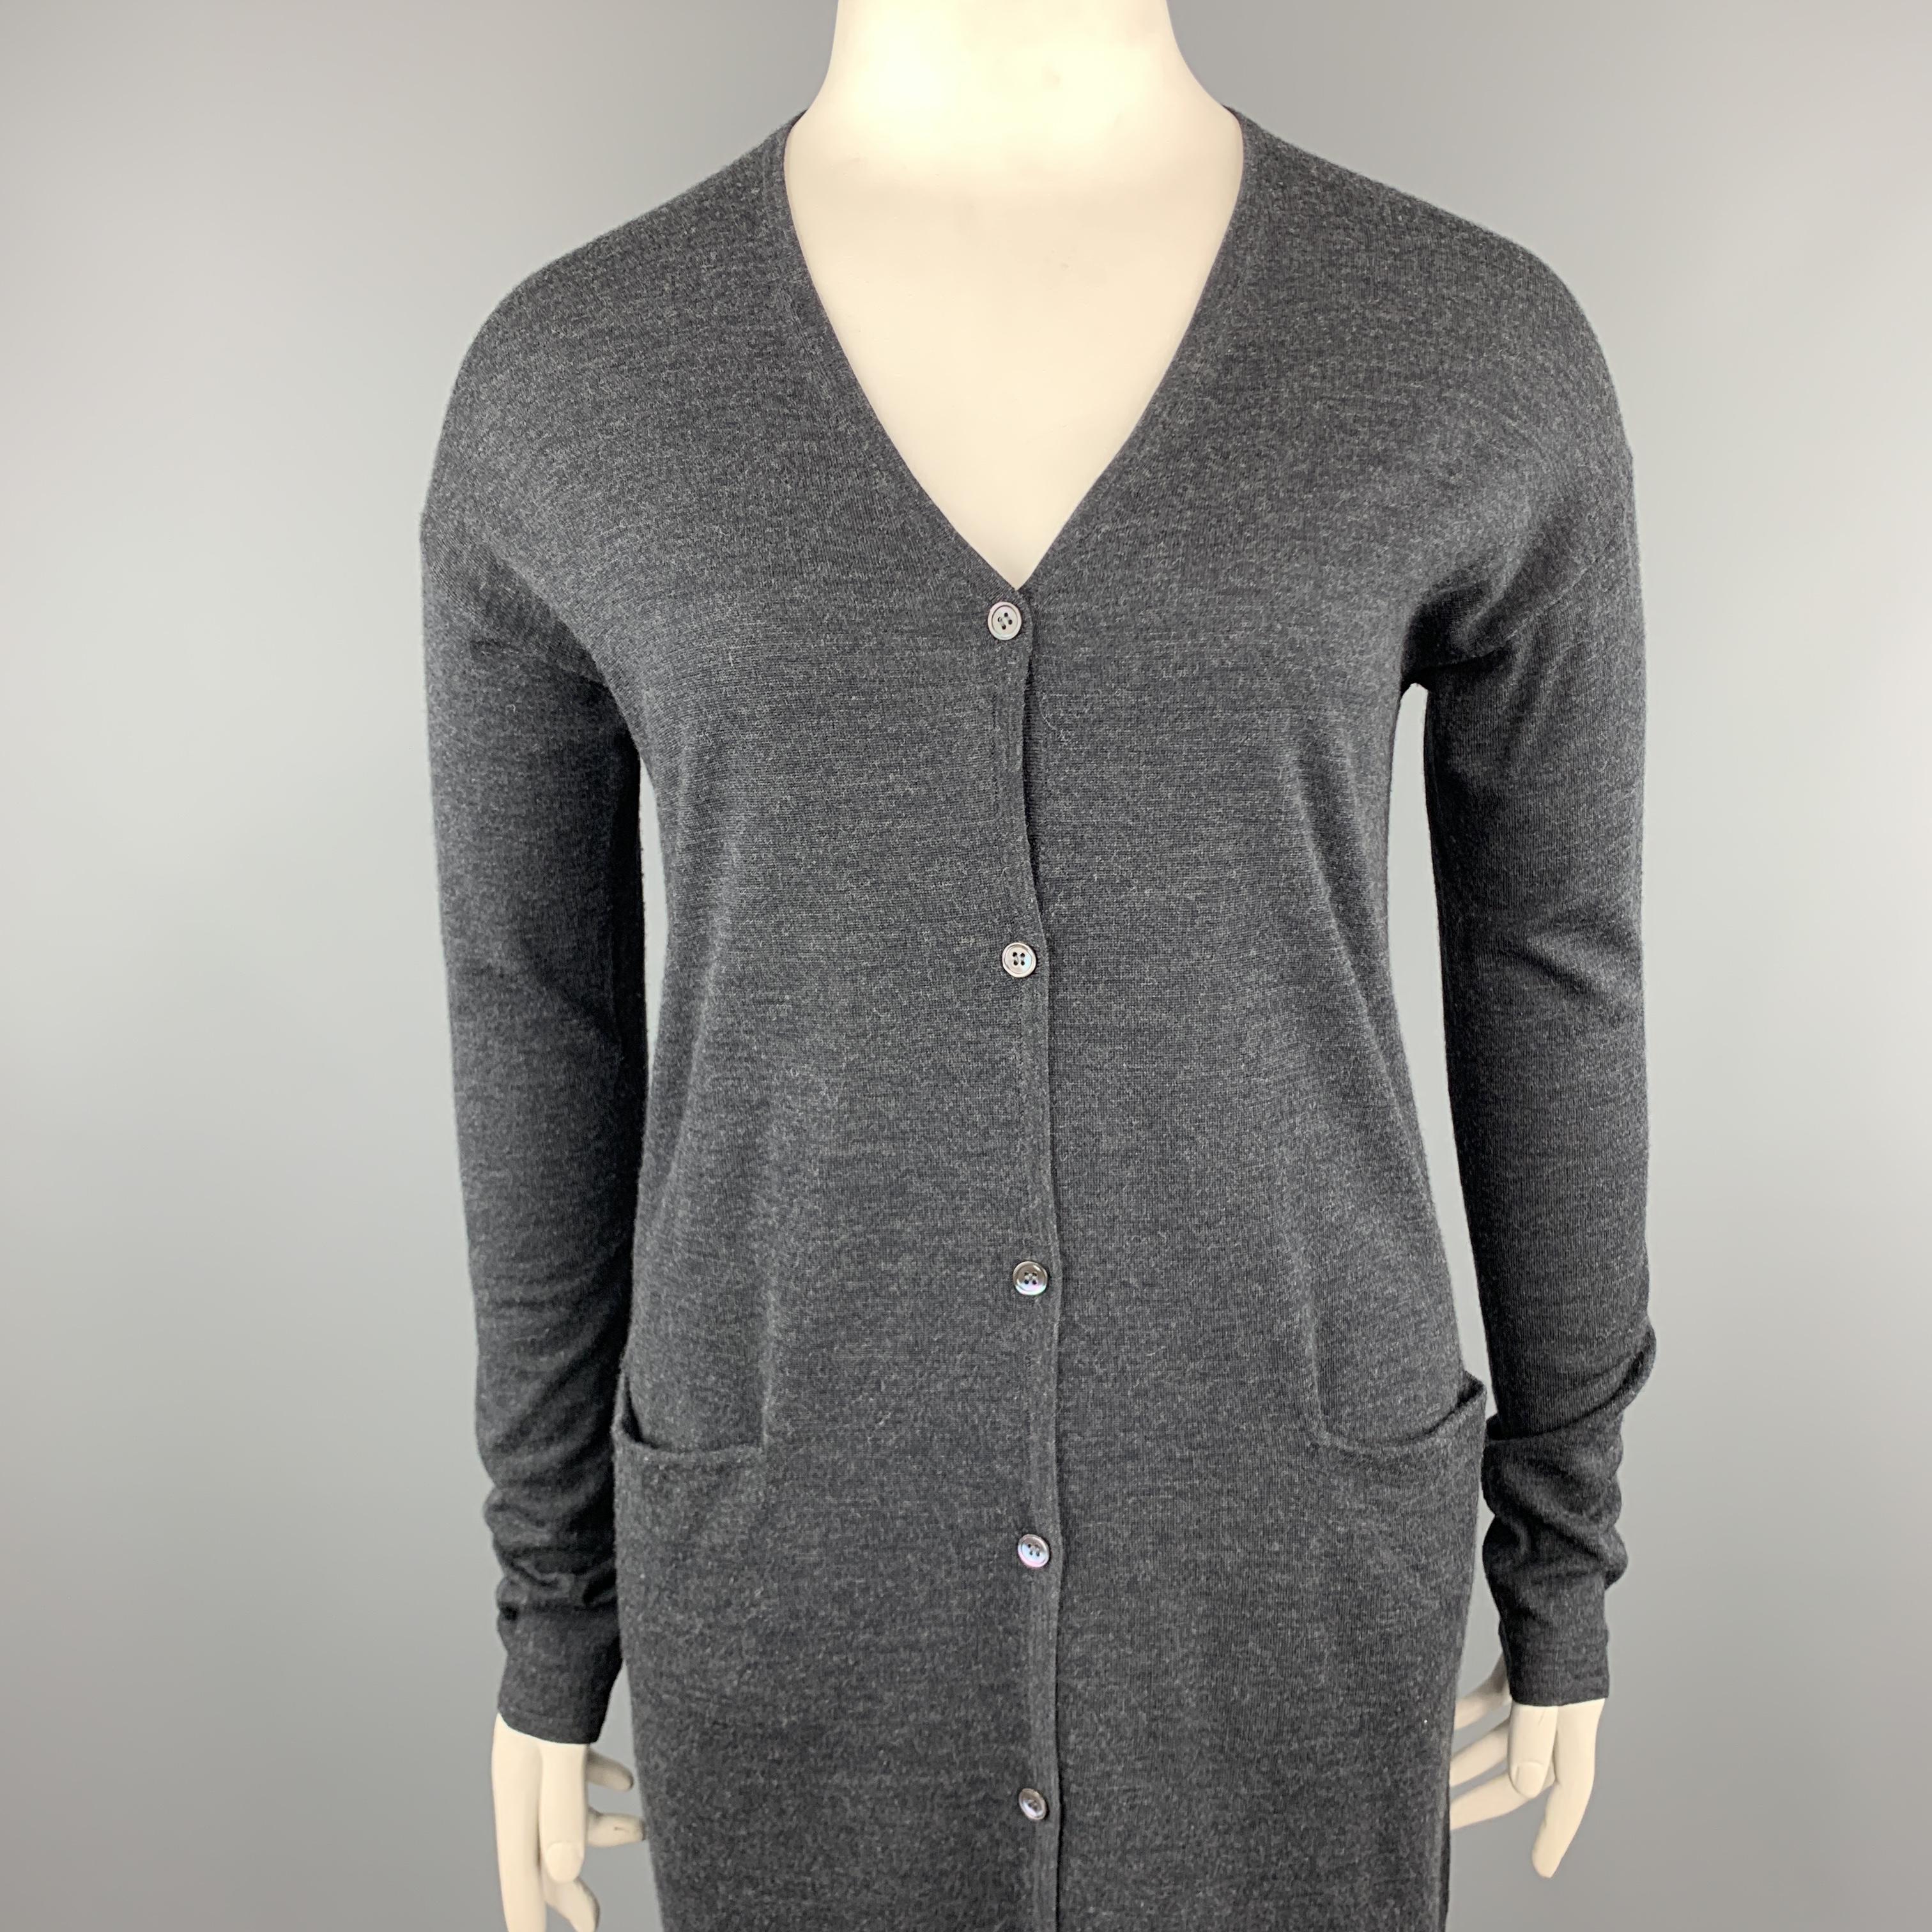 JIL SANDER duster cardigan comes in a light heather charcoal gray wool jersey knit with a deep V neckline, pockets, and extended long sleeves.

Excellent Pre-Owned Condition.
Marked: L

Measurements:

Shoulder: 24 in.
Bust: 44 in.
Sleeve: 24